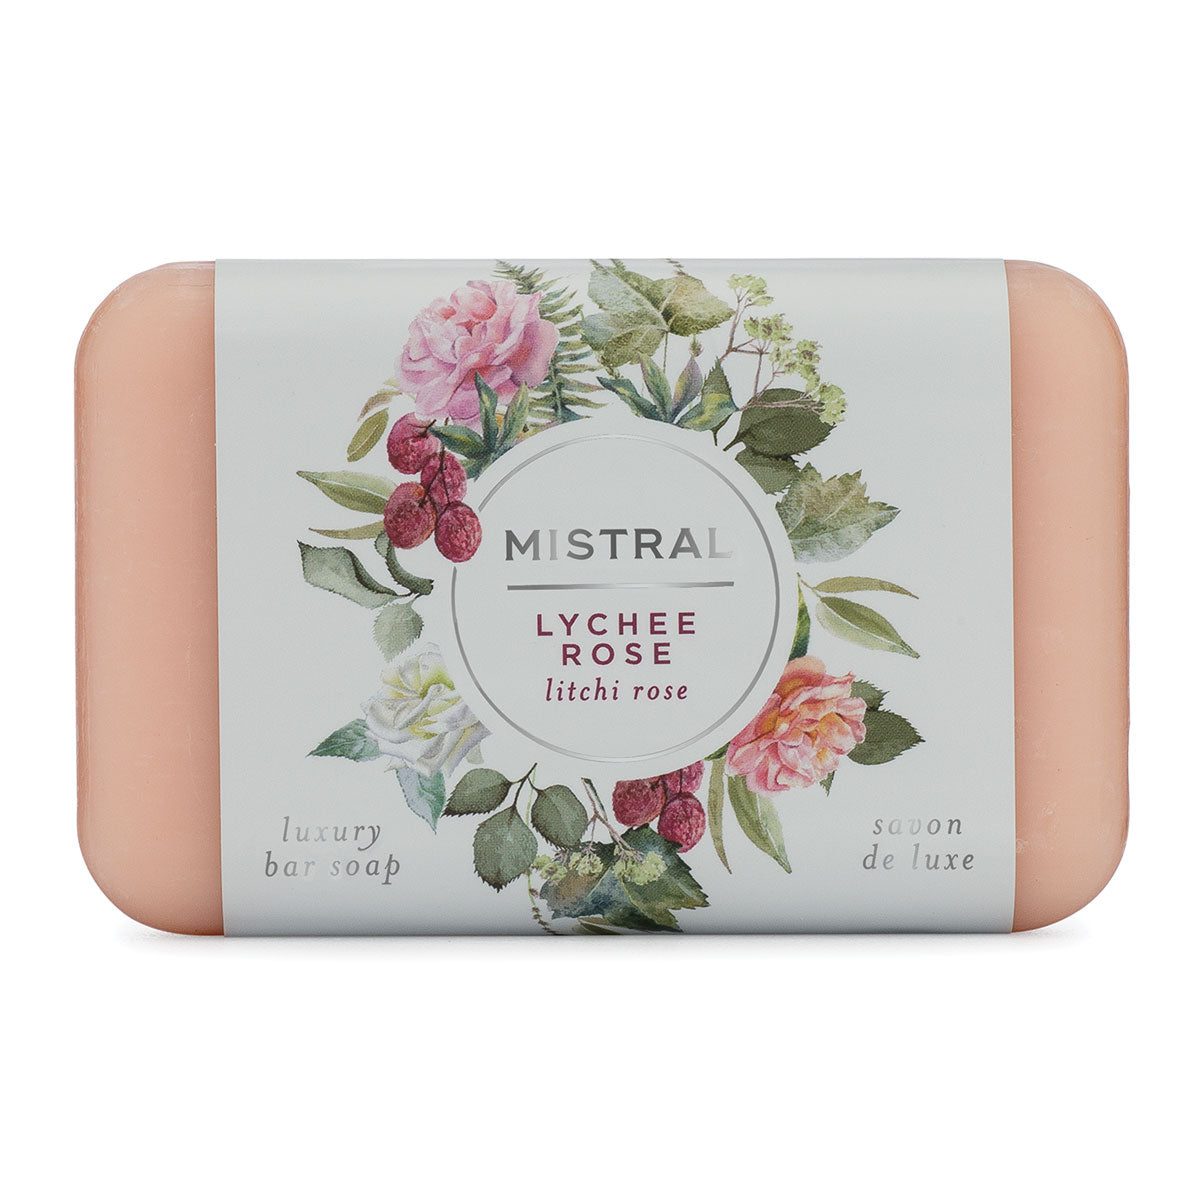 All Bar Soaps